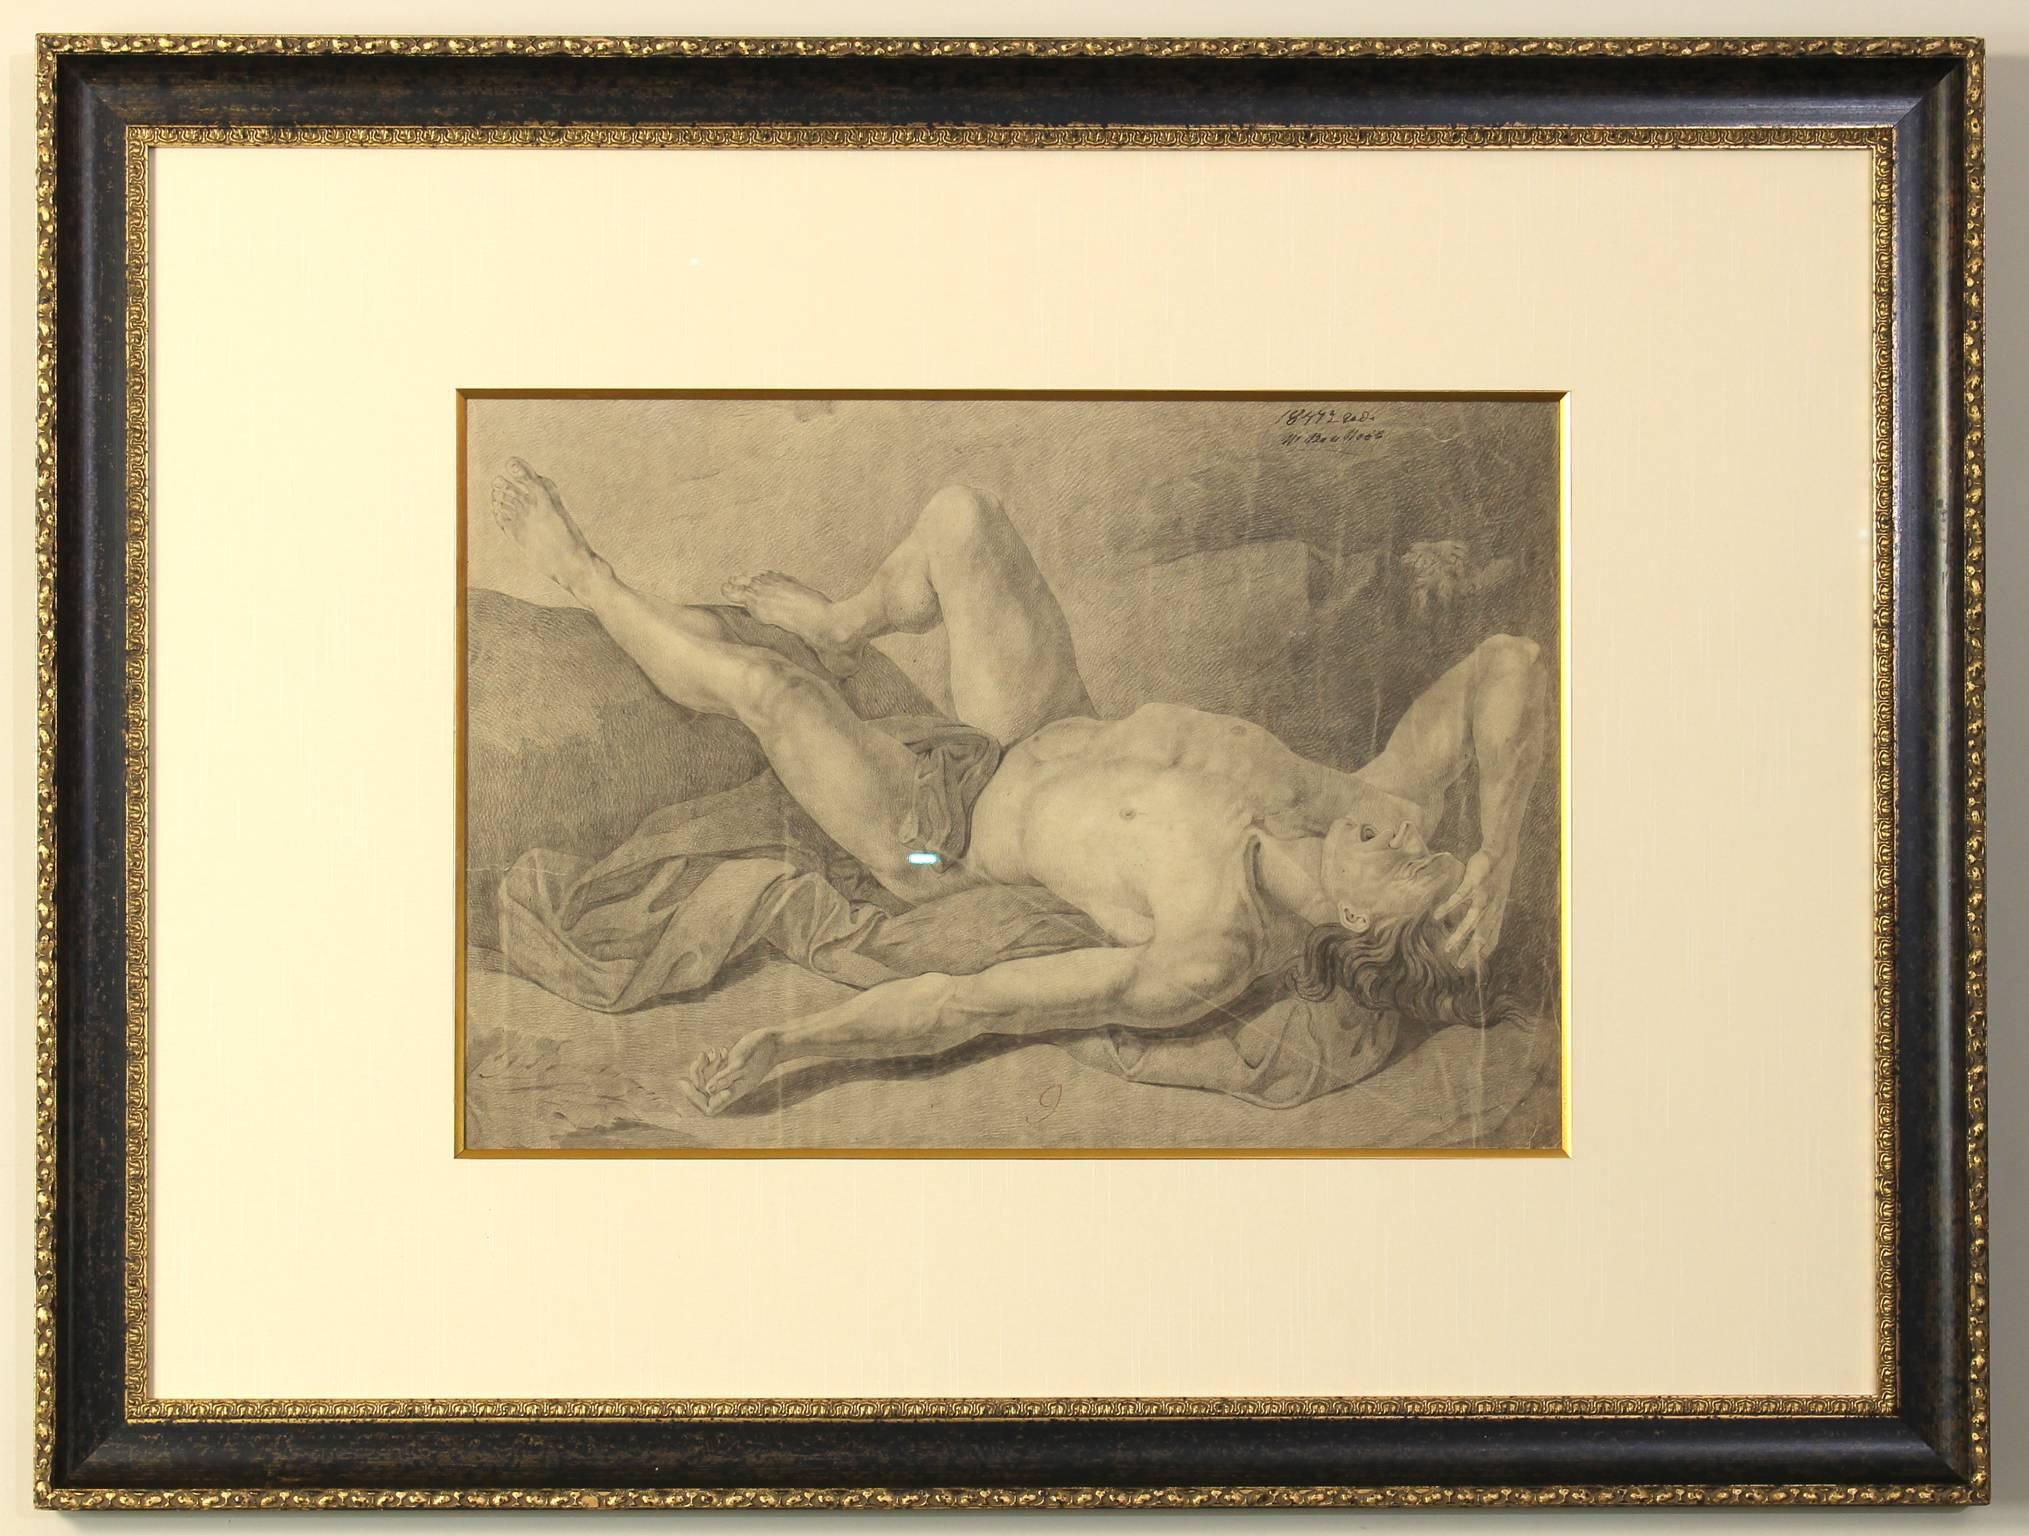 A large, dramatic and detailed pencil sketch of a fallen warrior recently framed and matted under museum glass. Signed and dated 1847, Poland.